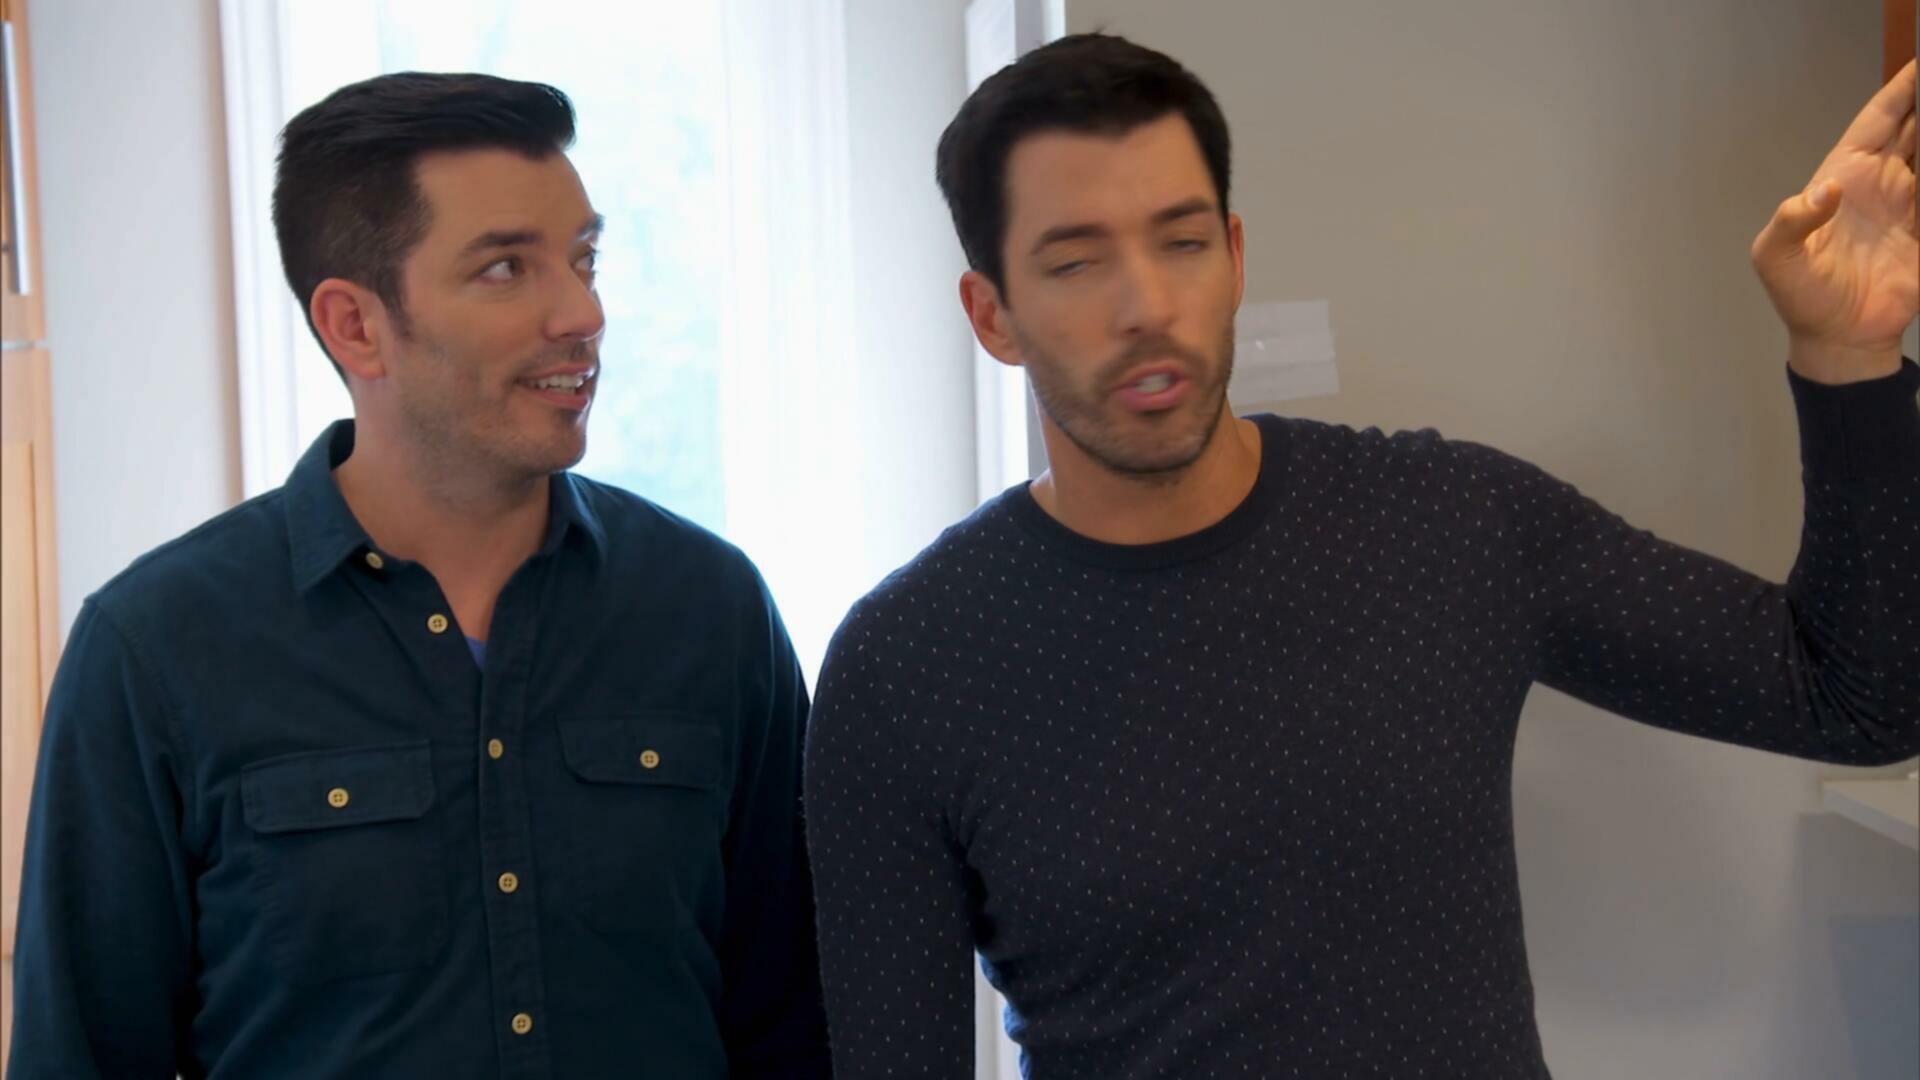 Property Brothers S12E07 Floored by the Renovation Julie and Patrick 1080p MAX WEB DL DDP2 0 H 264 N